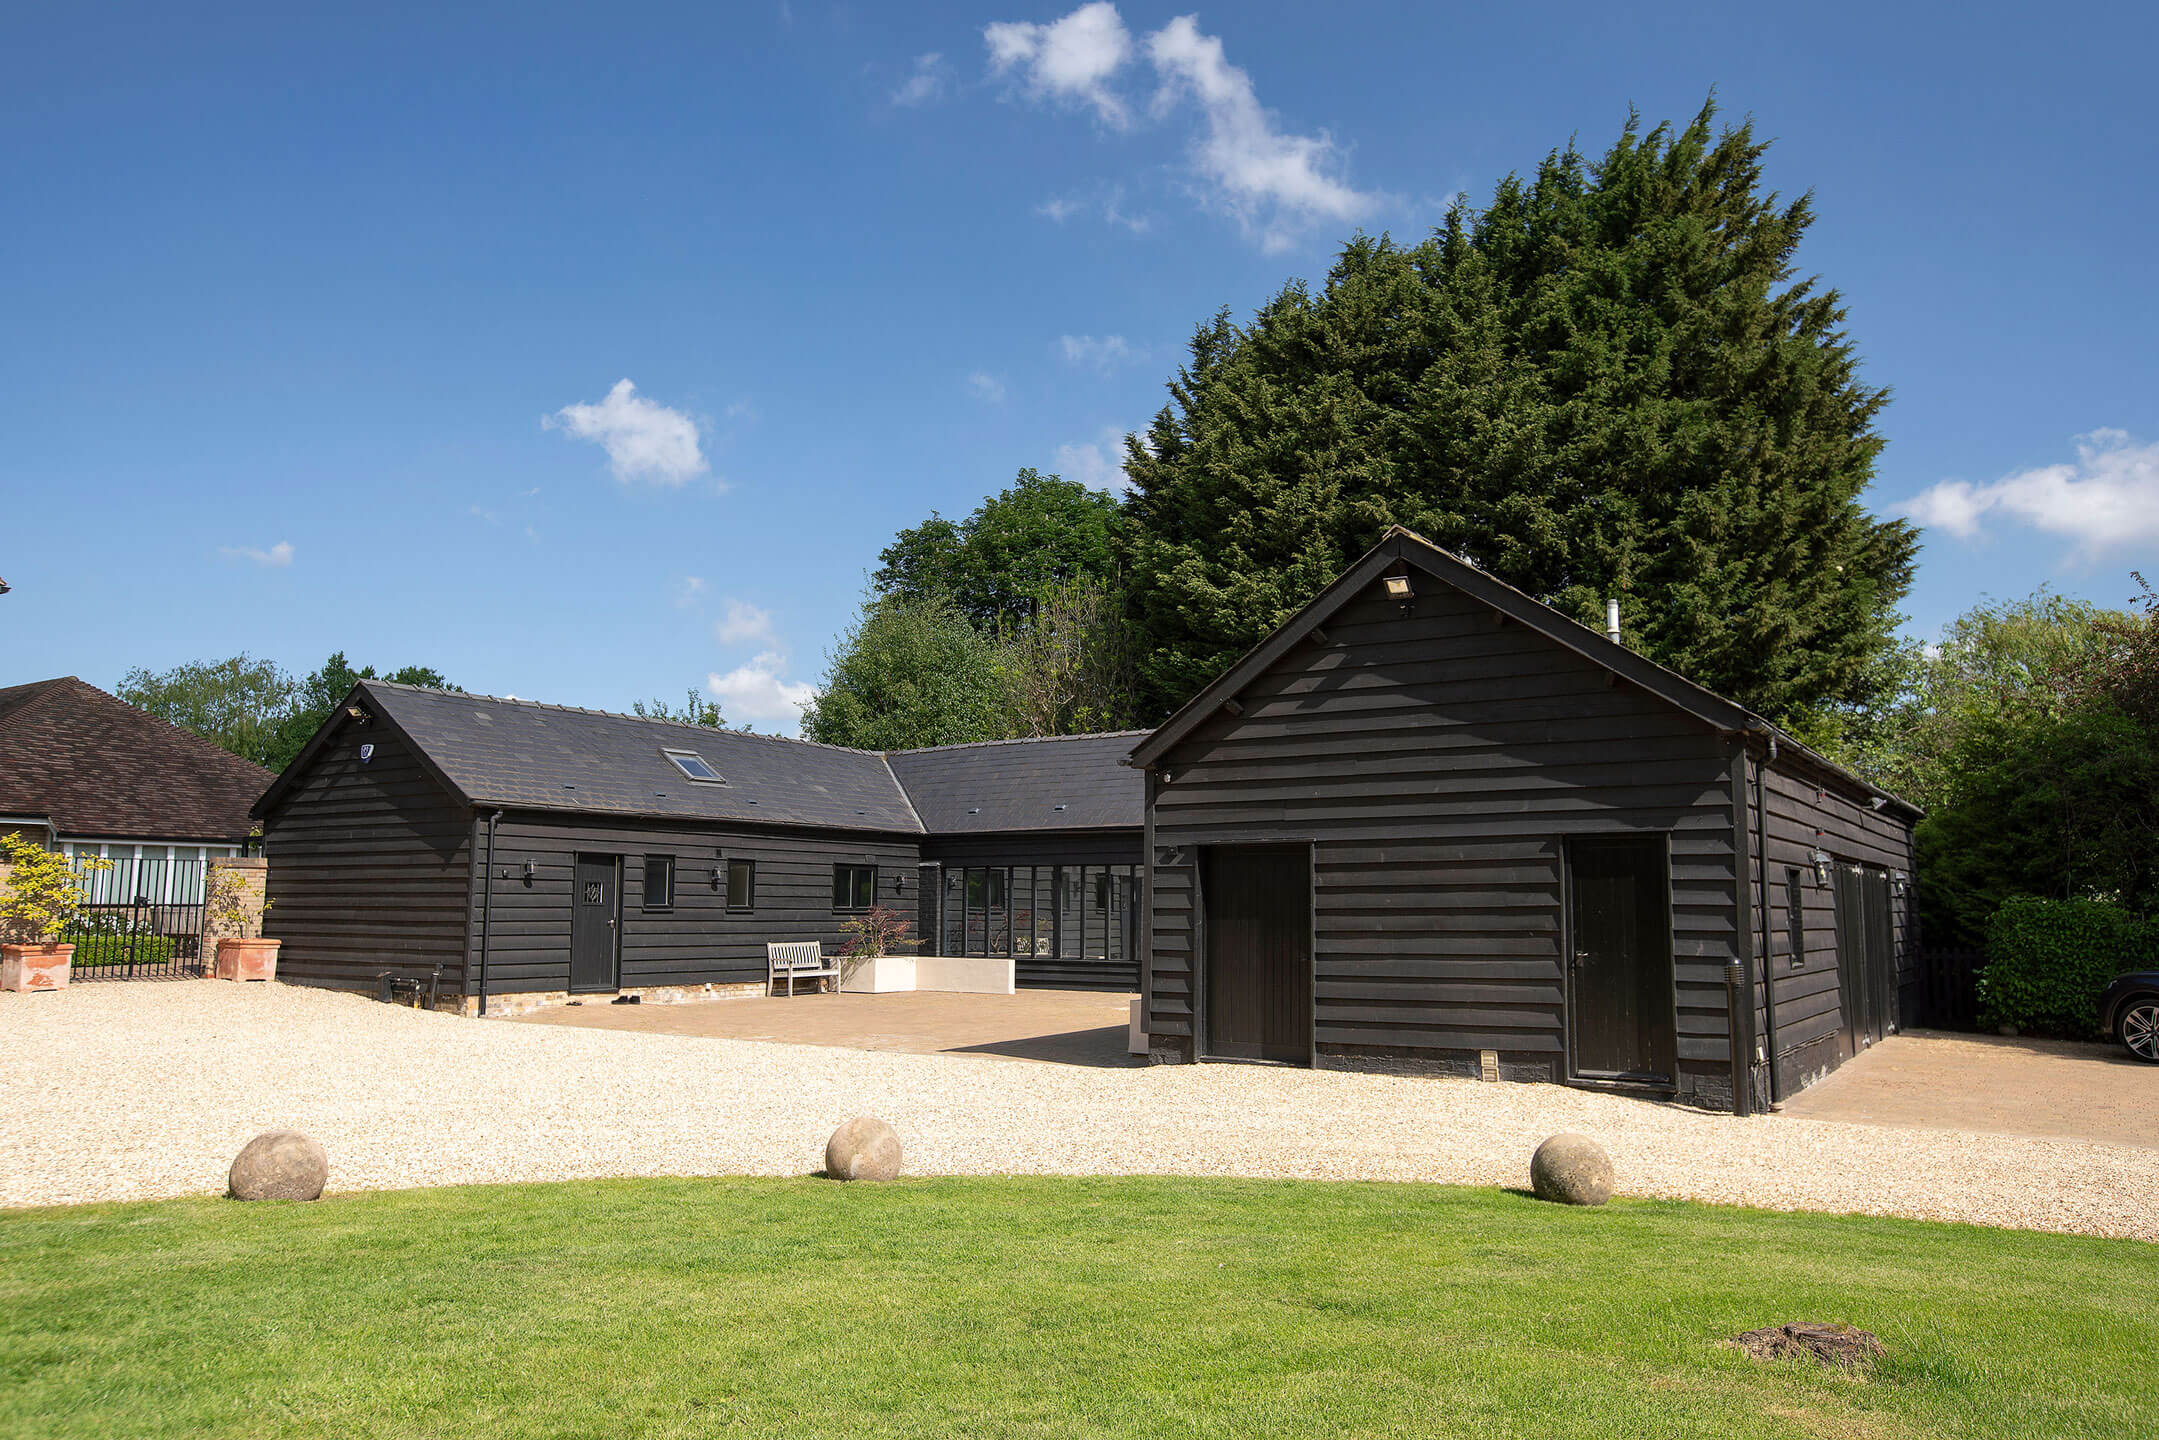 The Form Practice is located in a beautiful renovated barn in Hardwick near Cambridge offering various Health & Wellness services including Osteopath, K Laser and Pilates with ample free parking